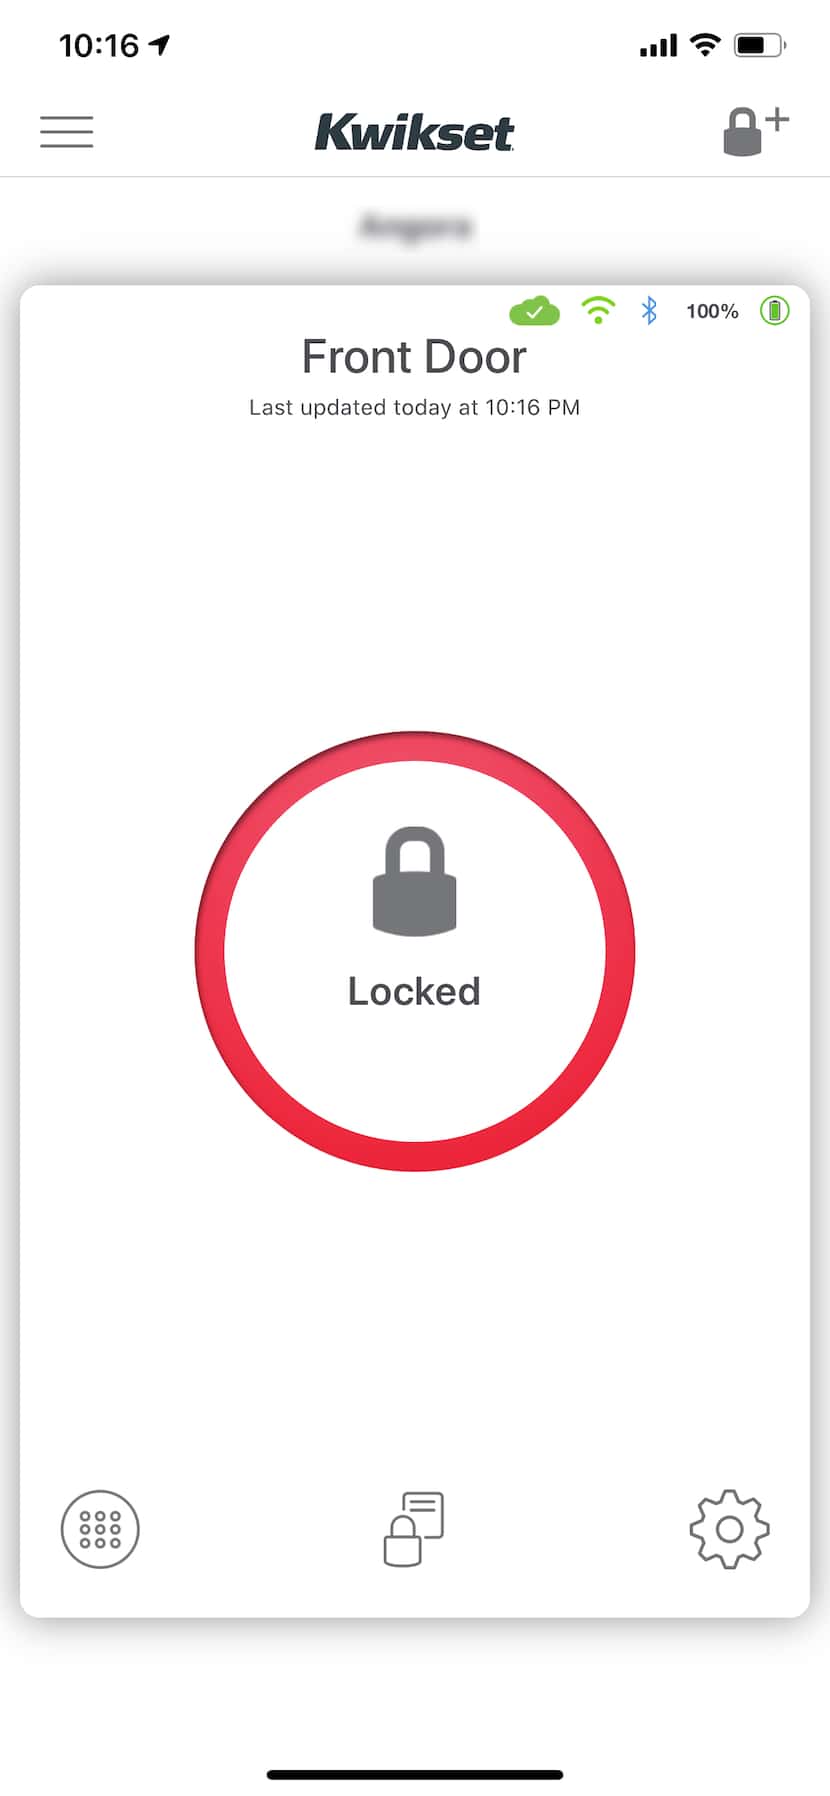 The main screen of the Kwikset app lets you see the lock status and lock or unlock the door.